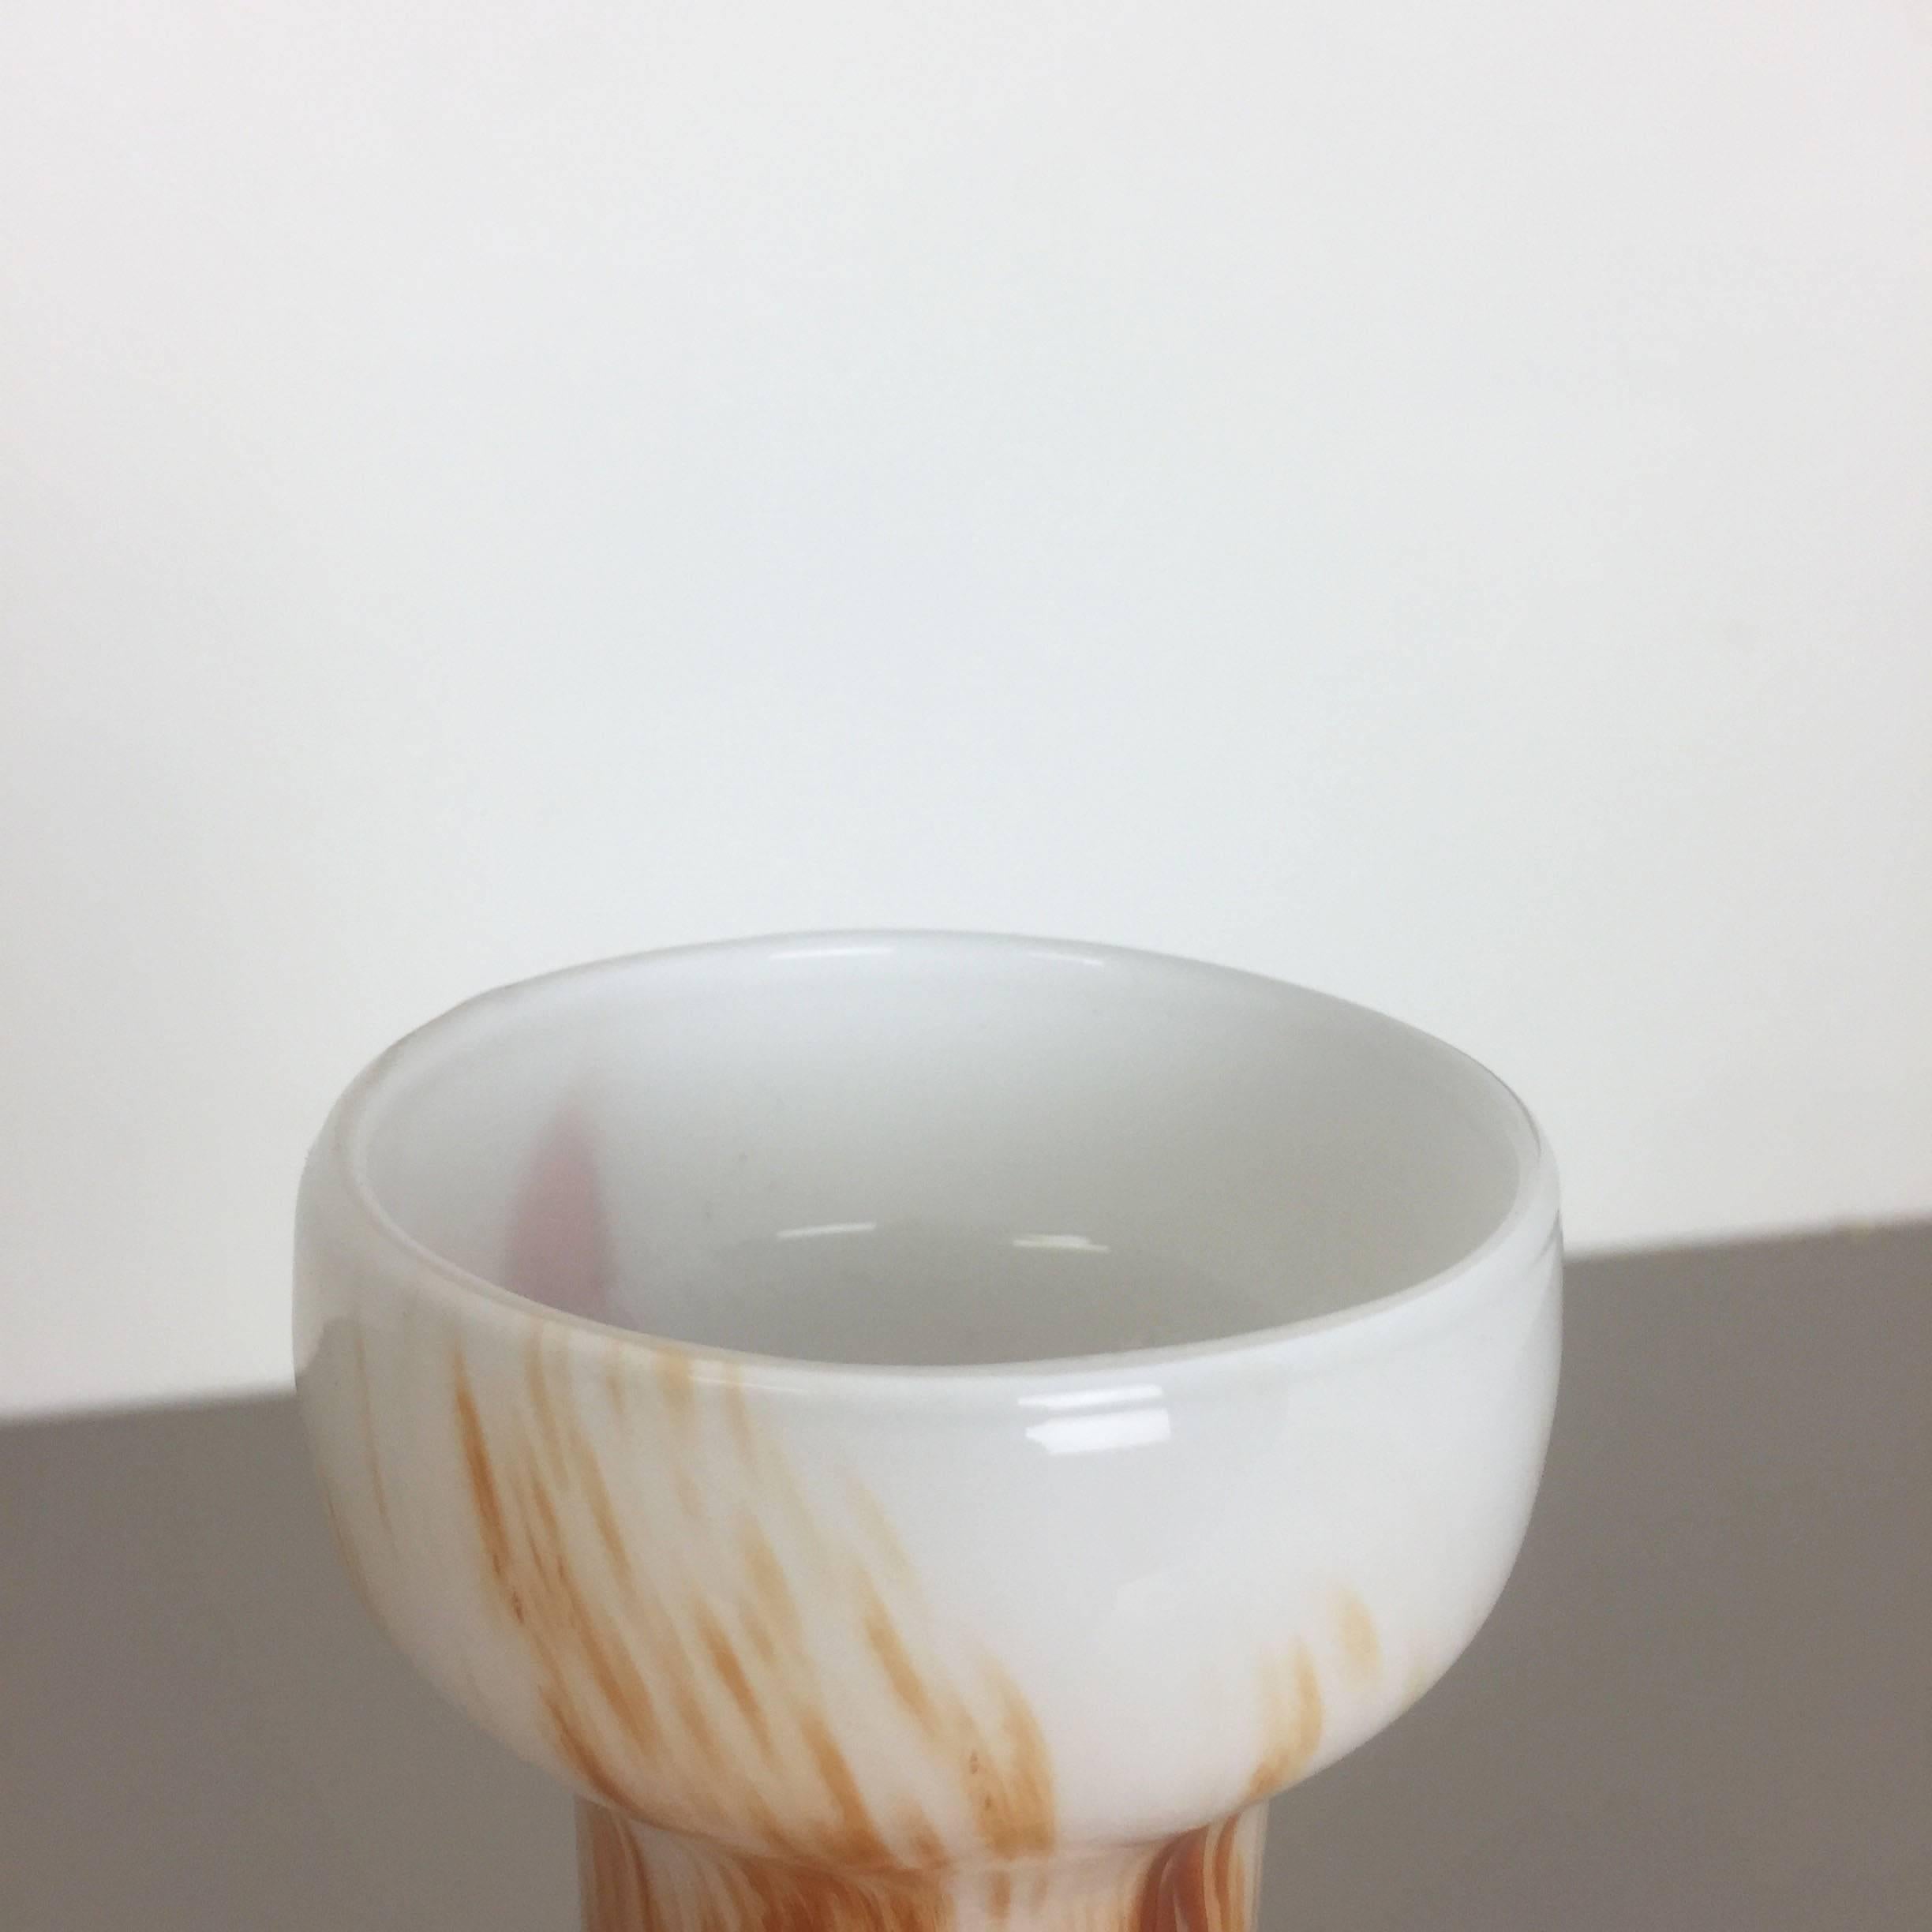 Vintage 1970s Opaline Florence Vase Designed by Carlo Moretti, Italy For Sale 2